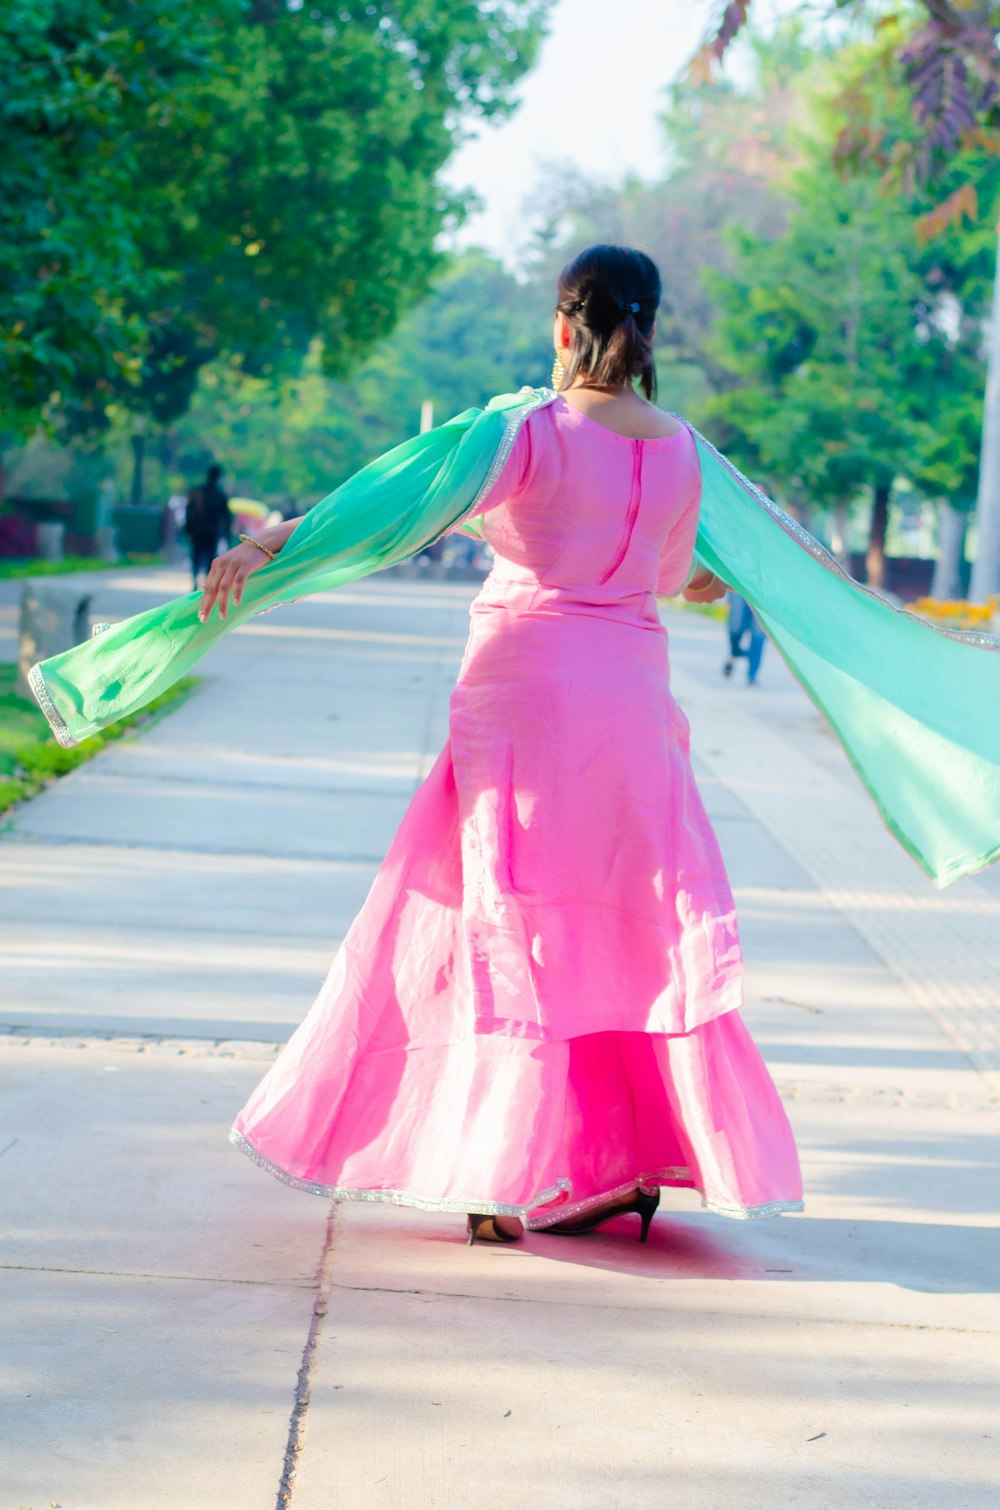 woman in pink dress holding green and blue scarf walking on street during daytime